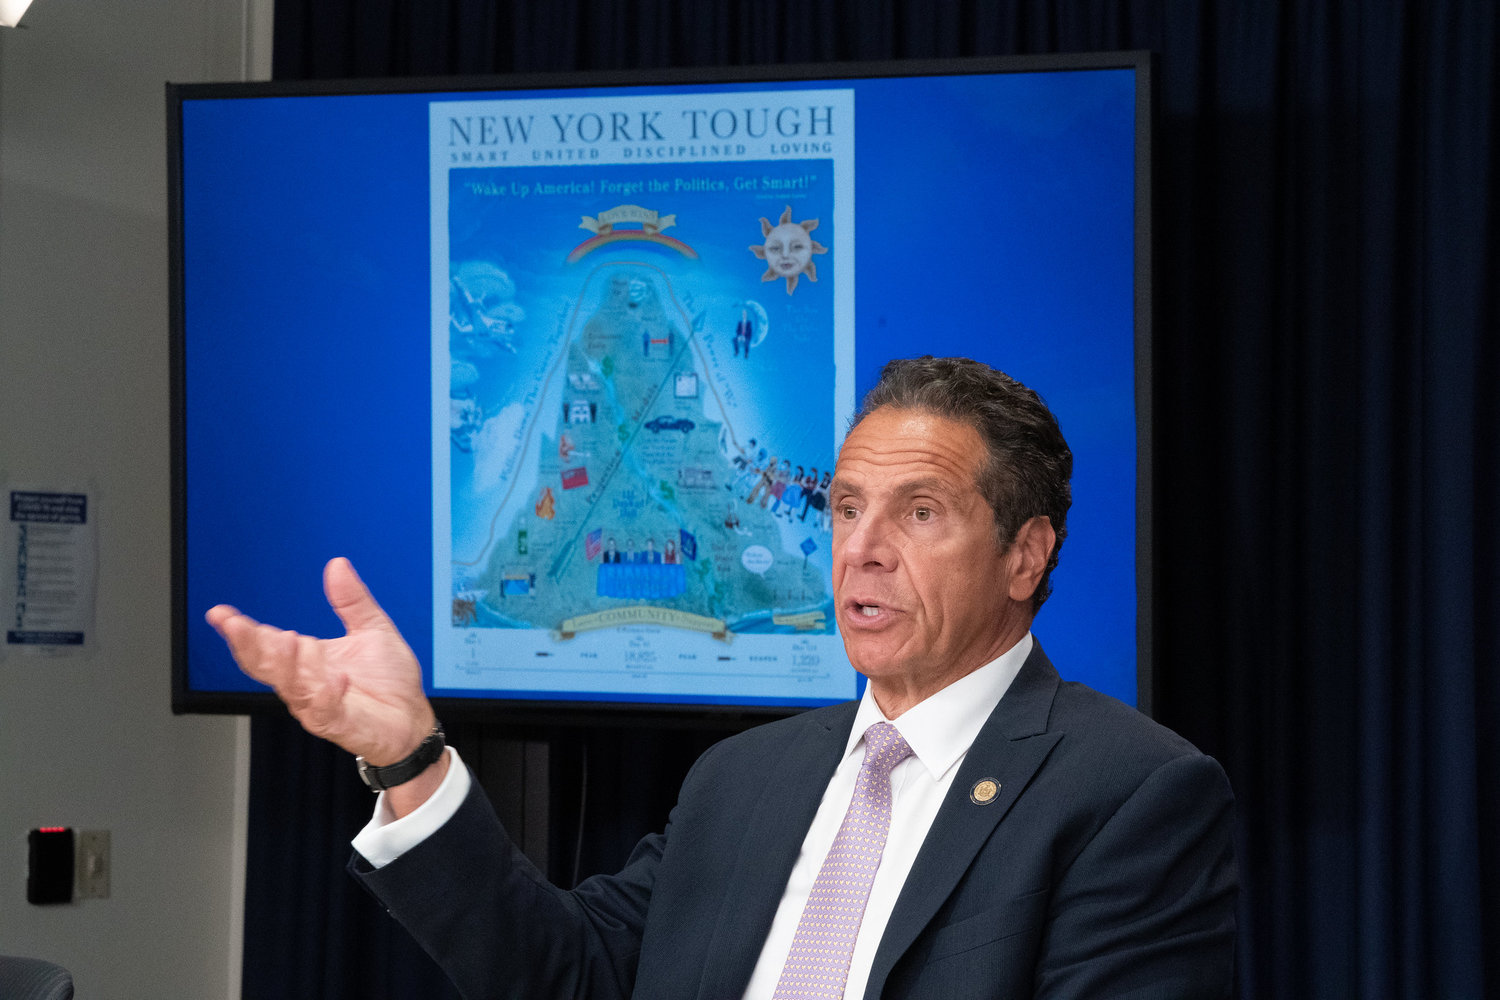 Gov. Andrew Cuomo is ready to let schools reopen in the fall, but only if they are in regions where the coronavirus outbreak is well under control.